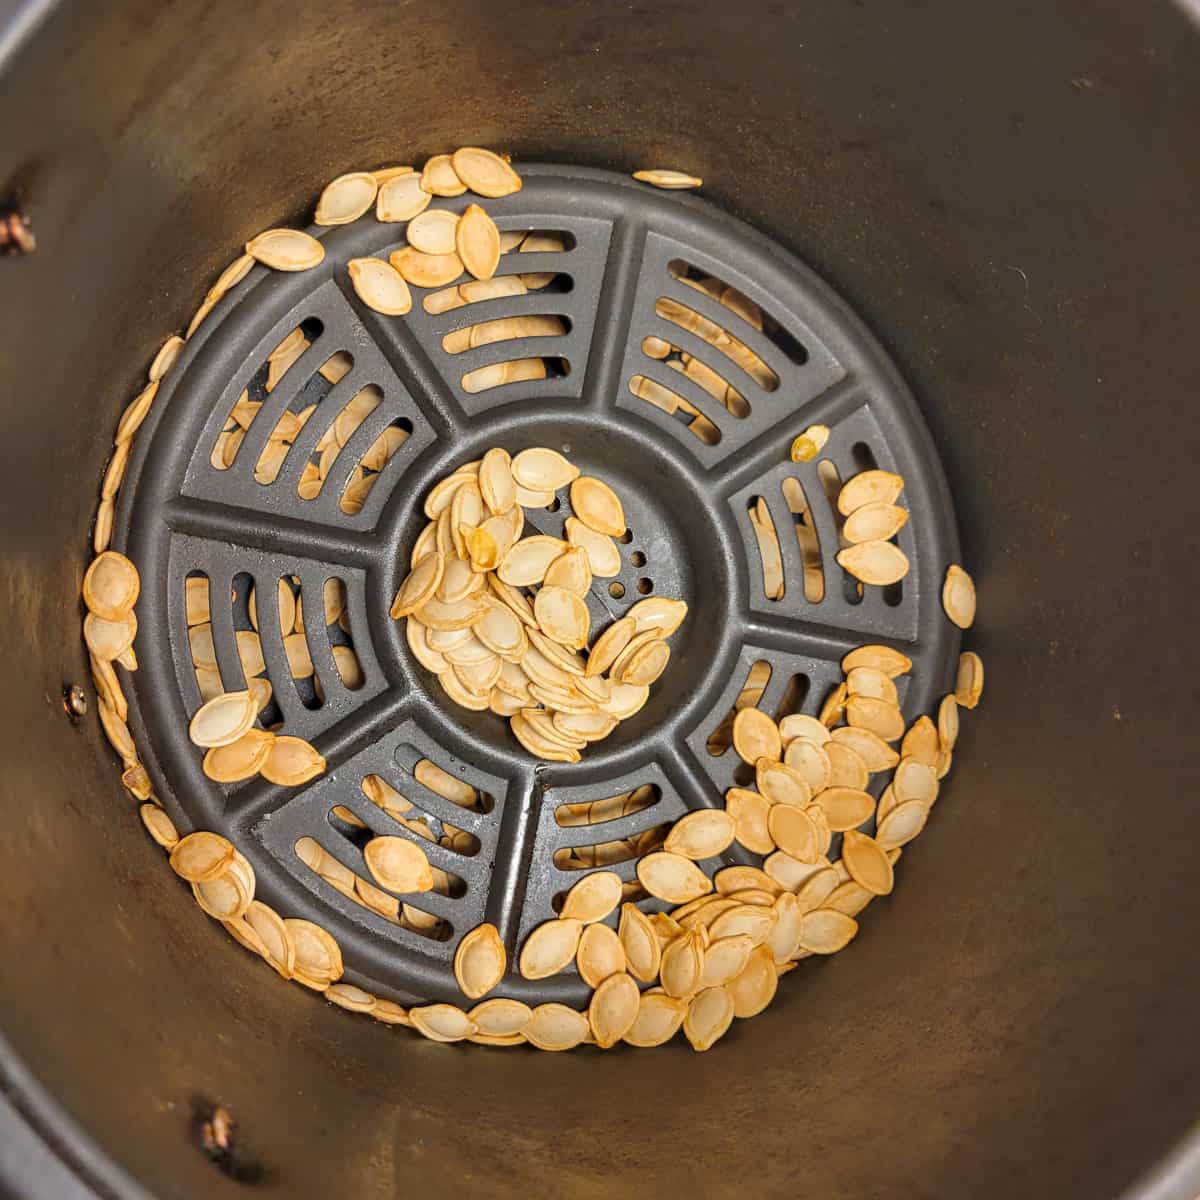 Cooked pumpkin seeds under the grate of the air fryer in the basket.